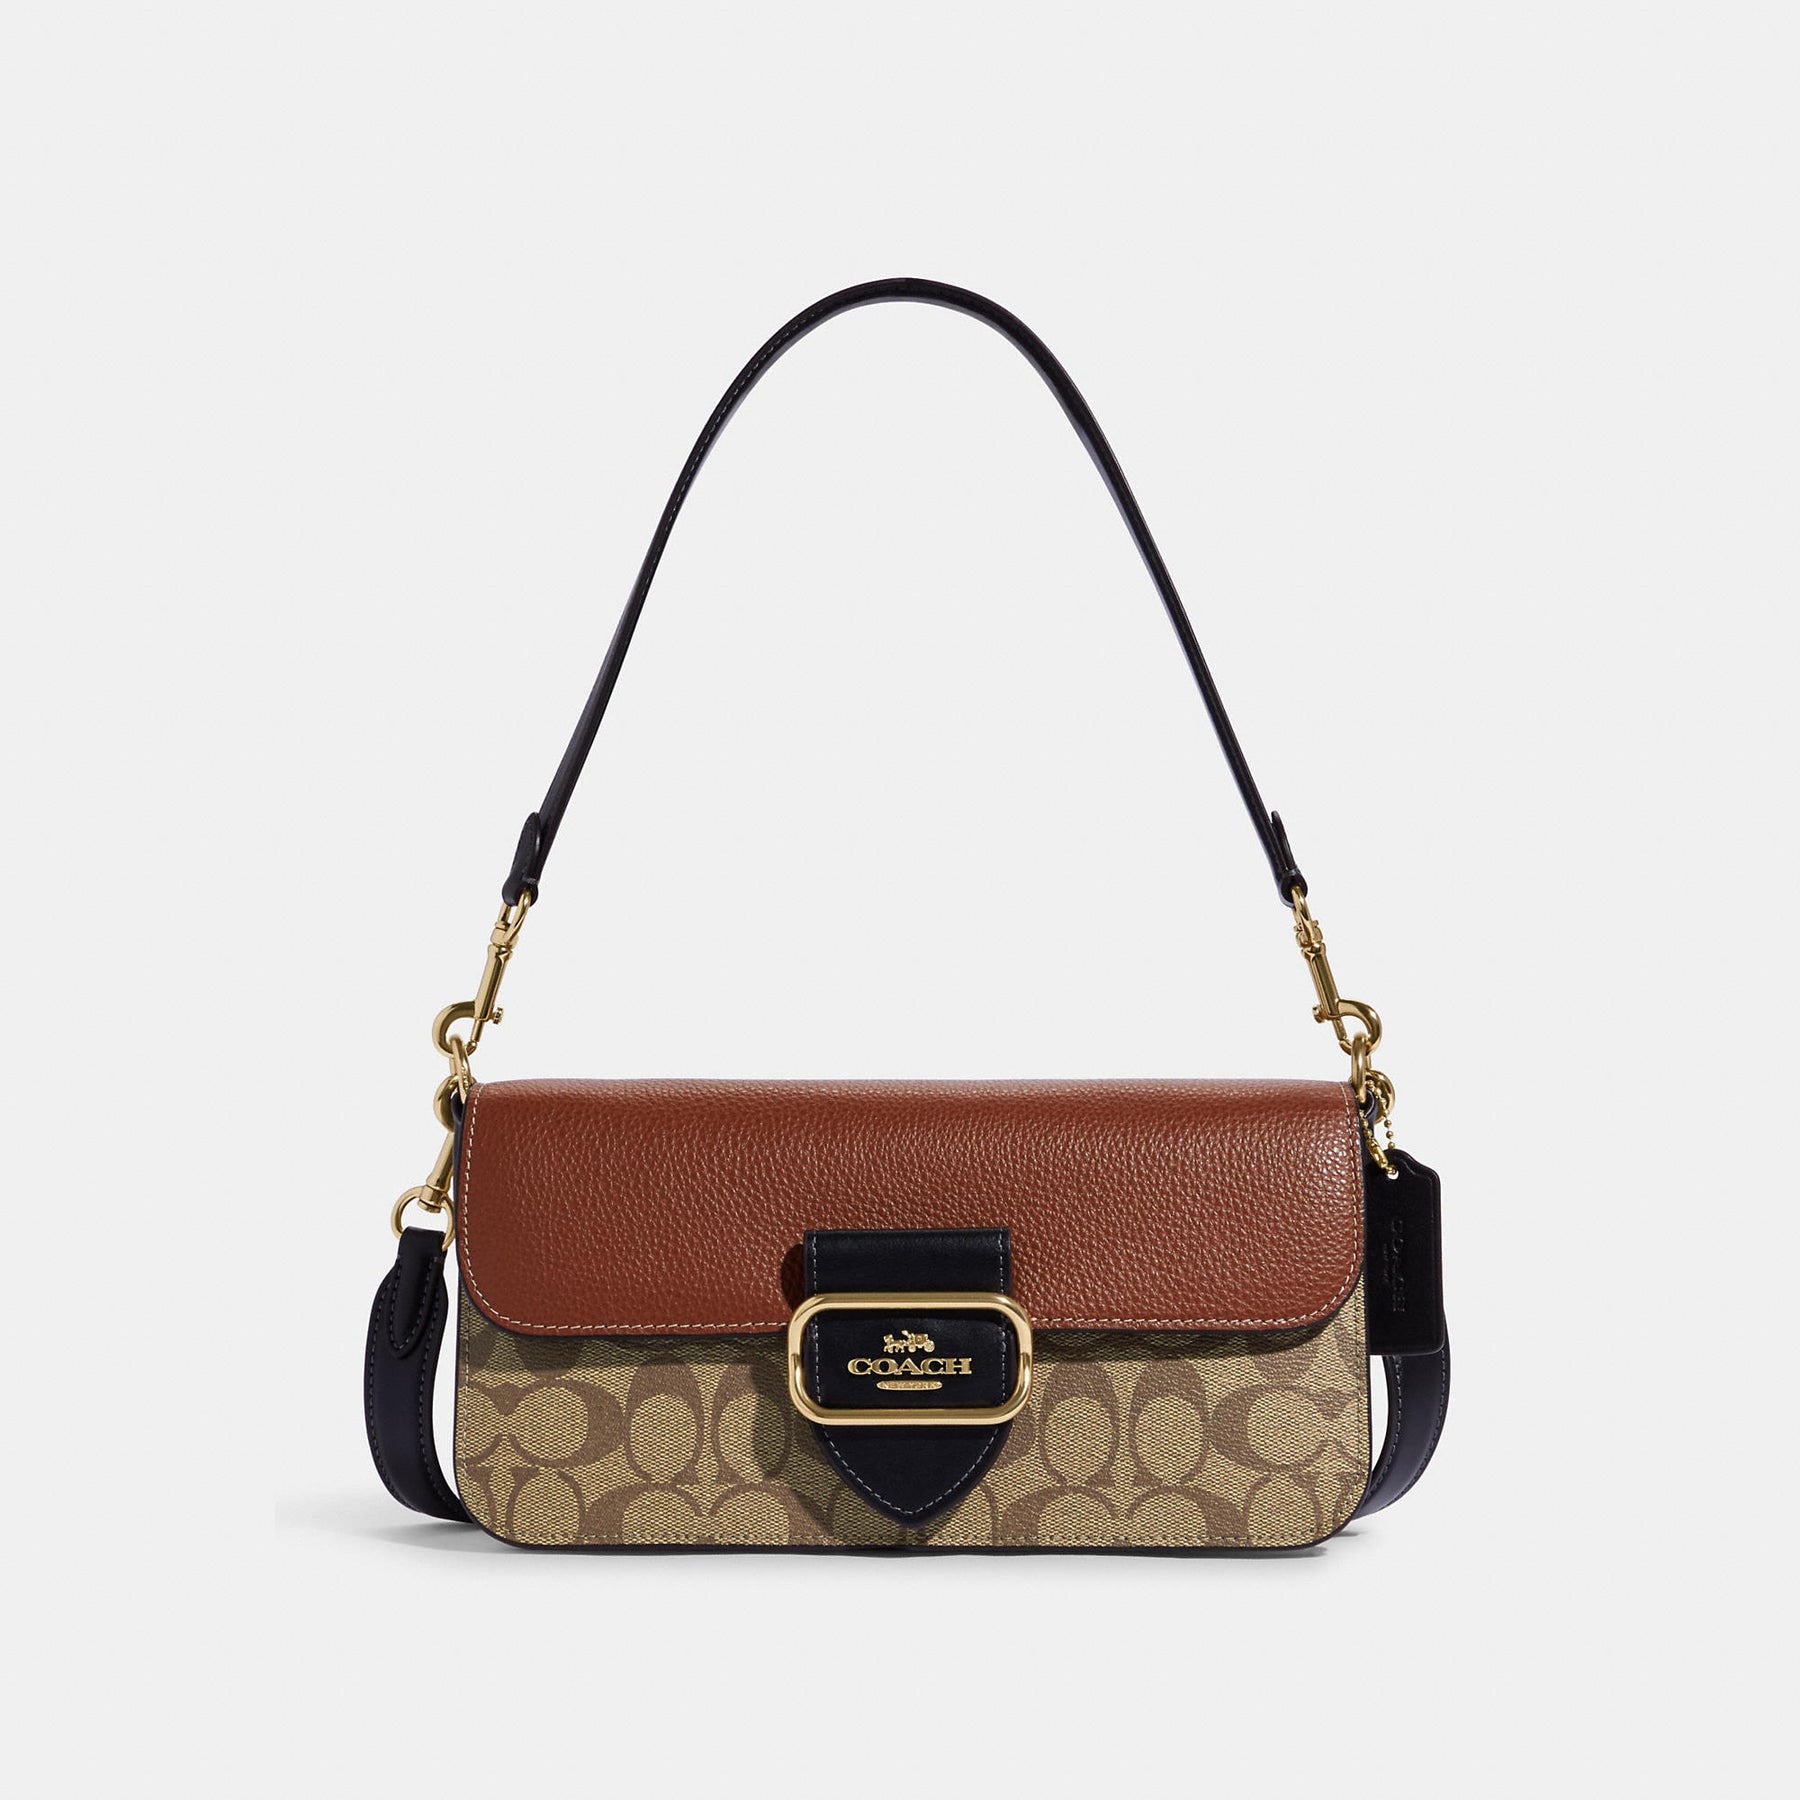 Coach Brown/Beige Signature Canvas, Suede and Leather Crossbody Bag